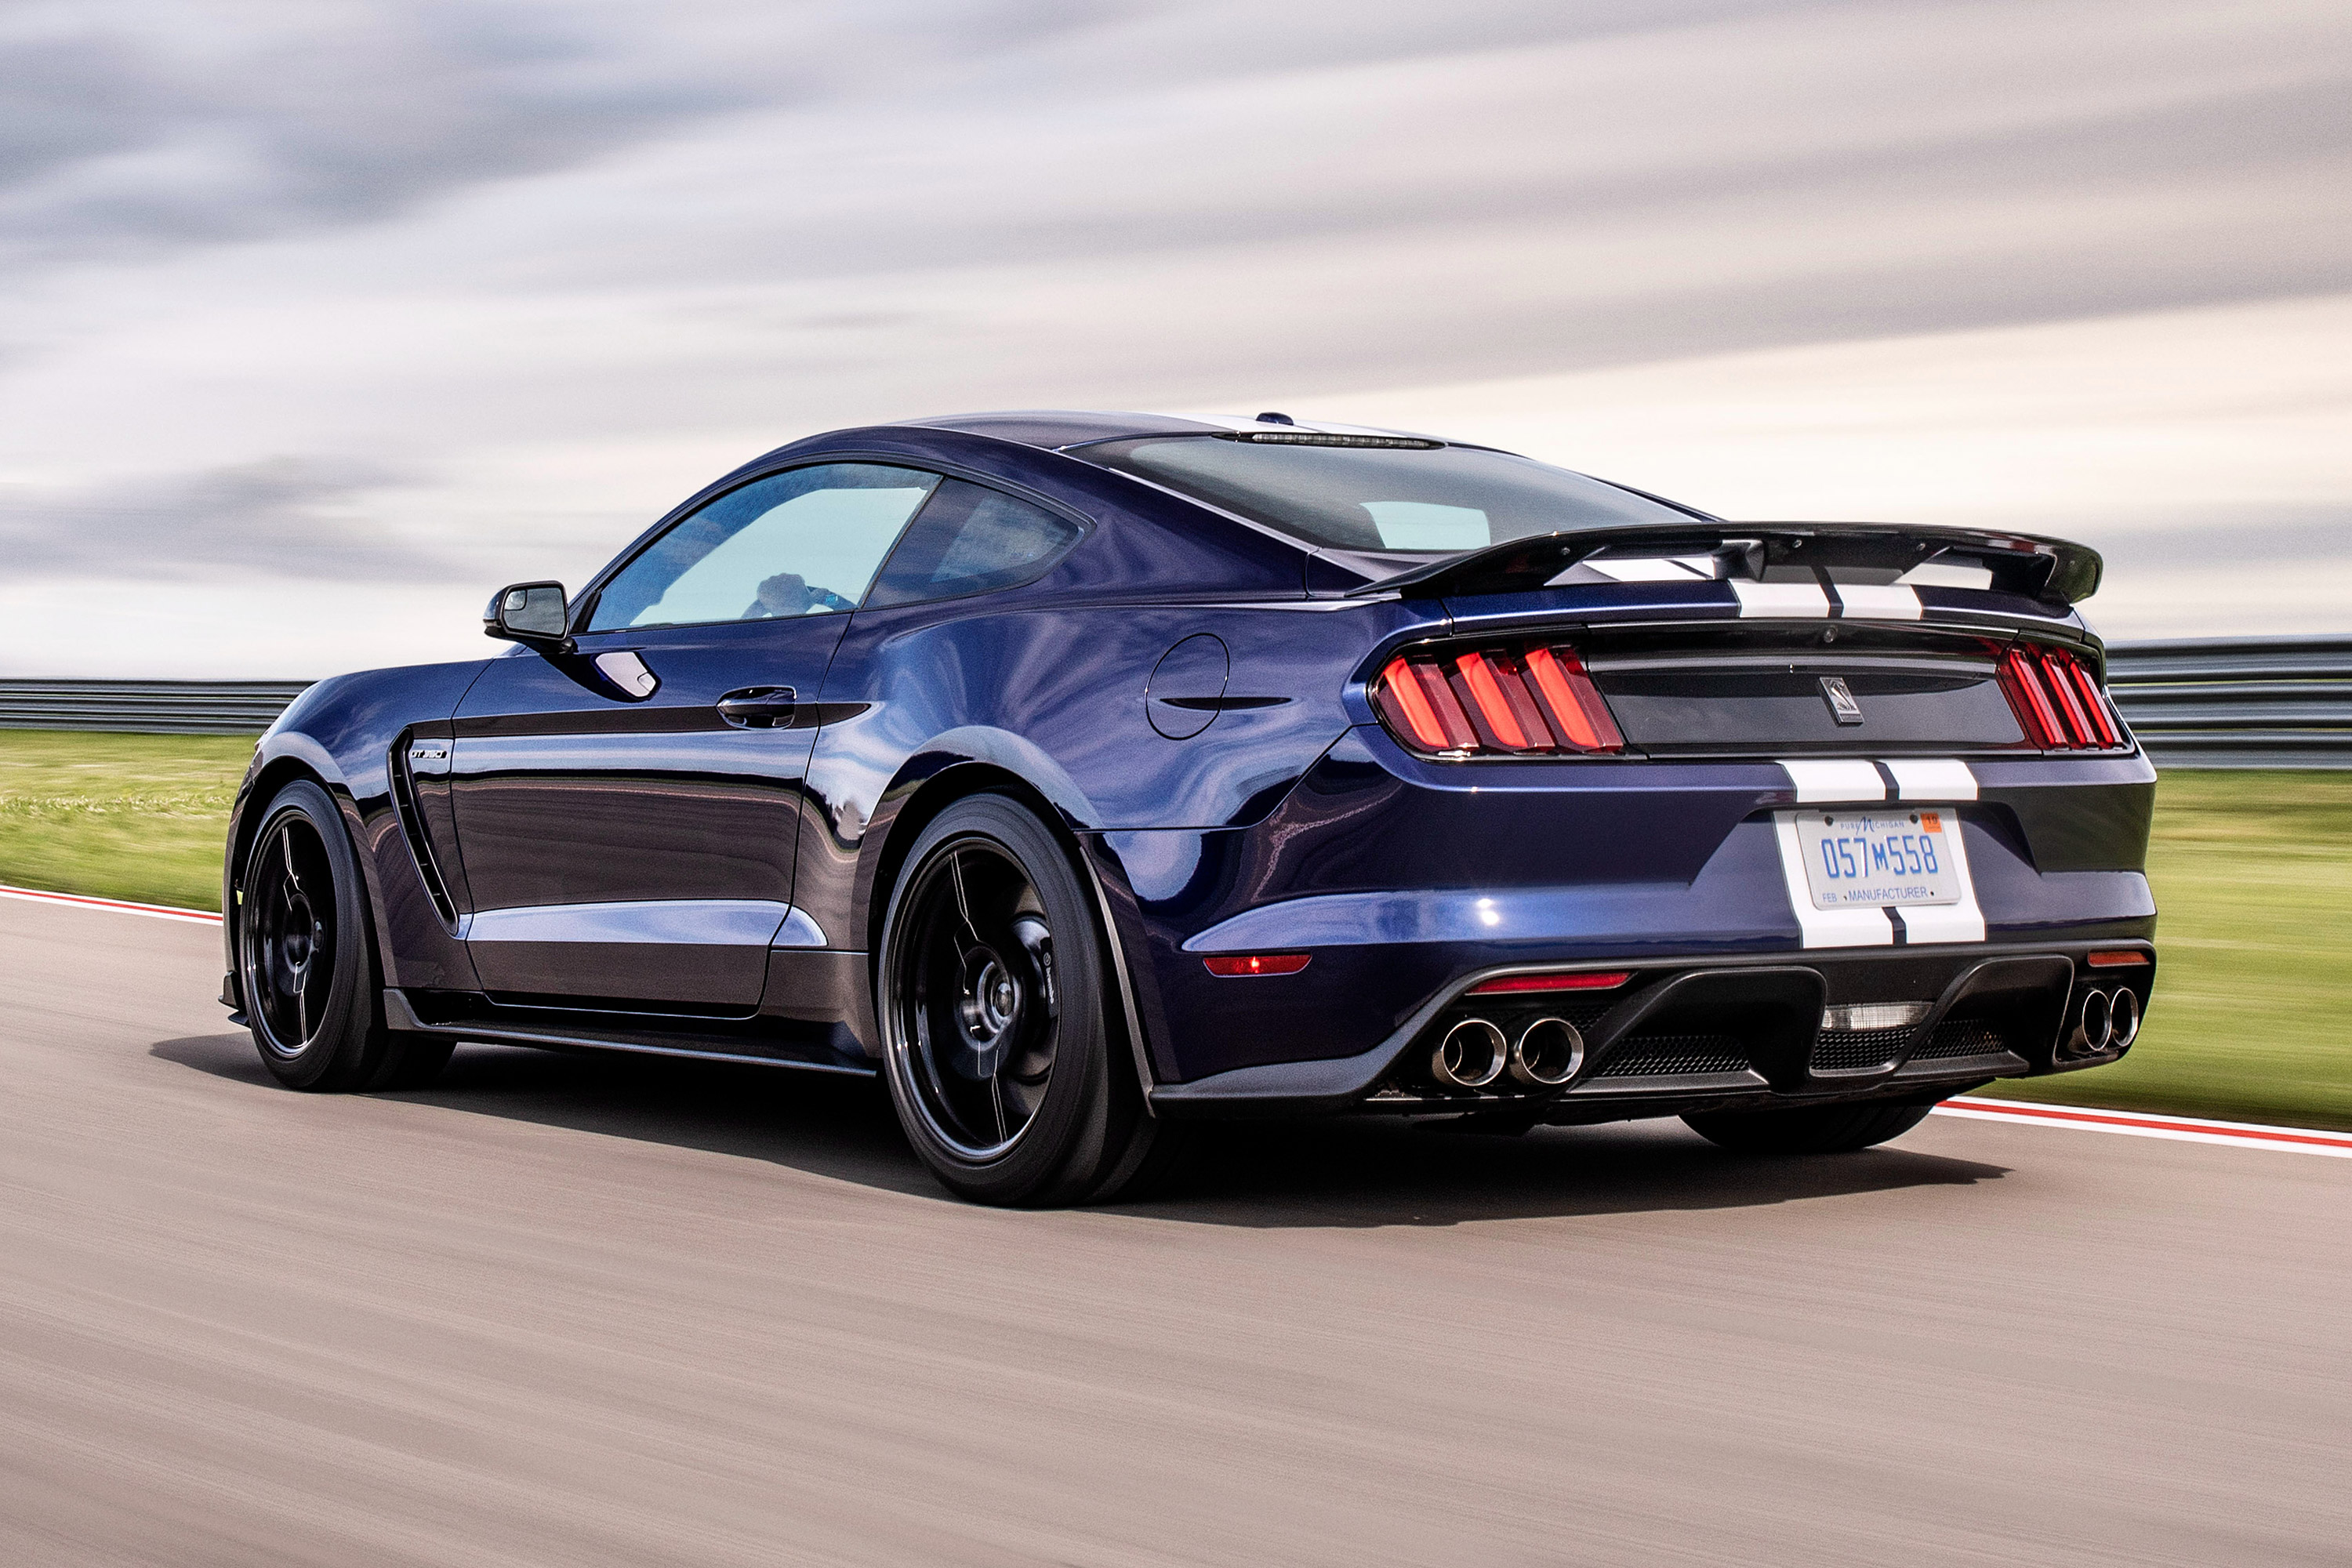  2019 Ford Shelby Mustang GT350 Wallpaper.